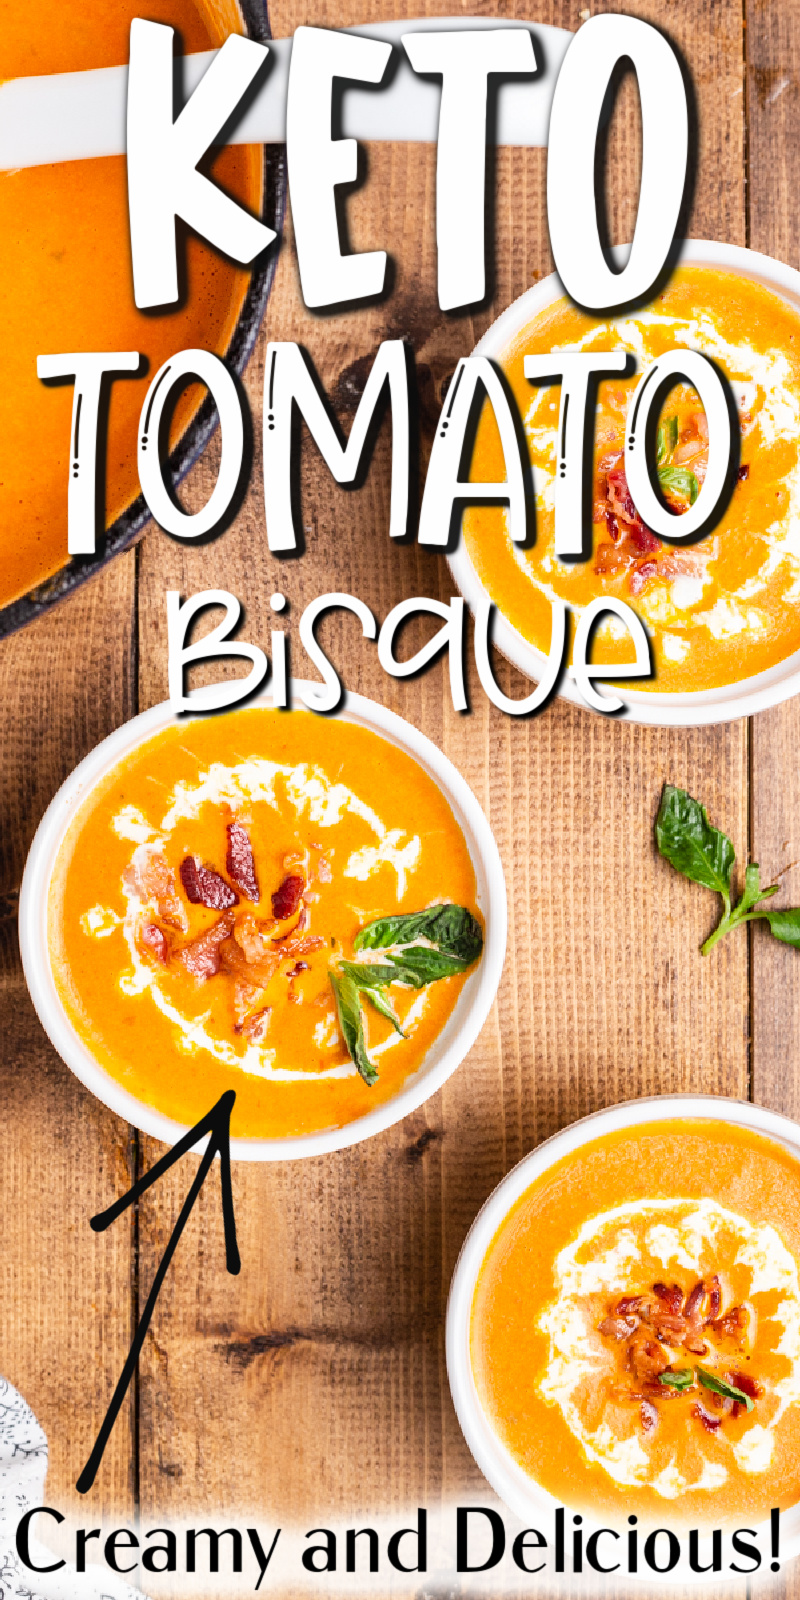 Keto Tomato Bisque with Bacon - This easy to make keto tomato soup is creamy and delicious with bacon and basil. It will quickly become a family favorite! #keto #lowcarb #glutenfree #tomato #bacon #basil #soup #bisque #easy #recipe